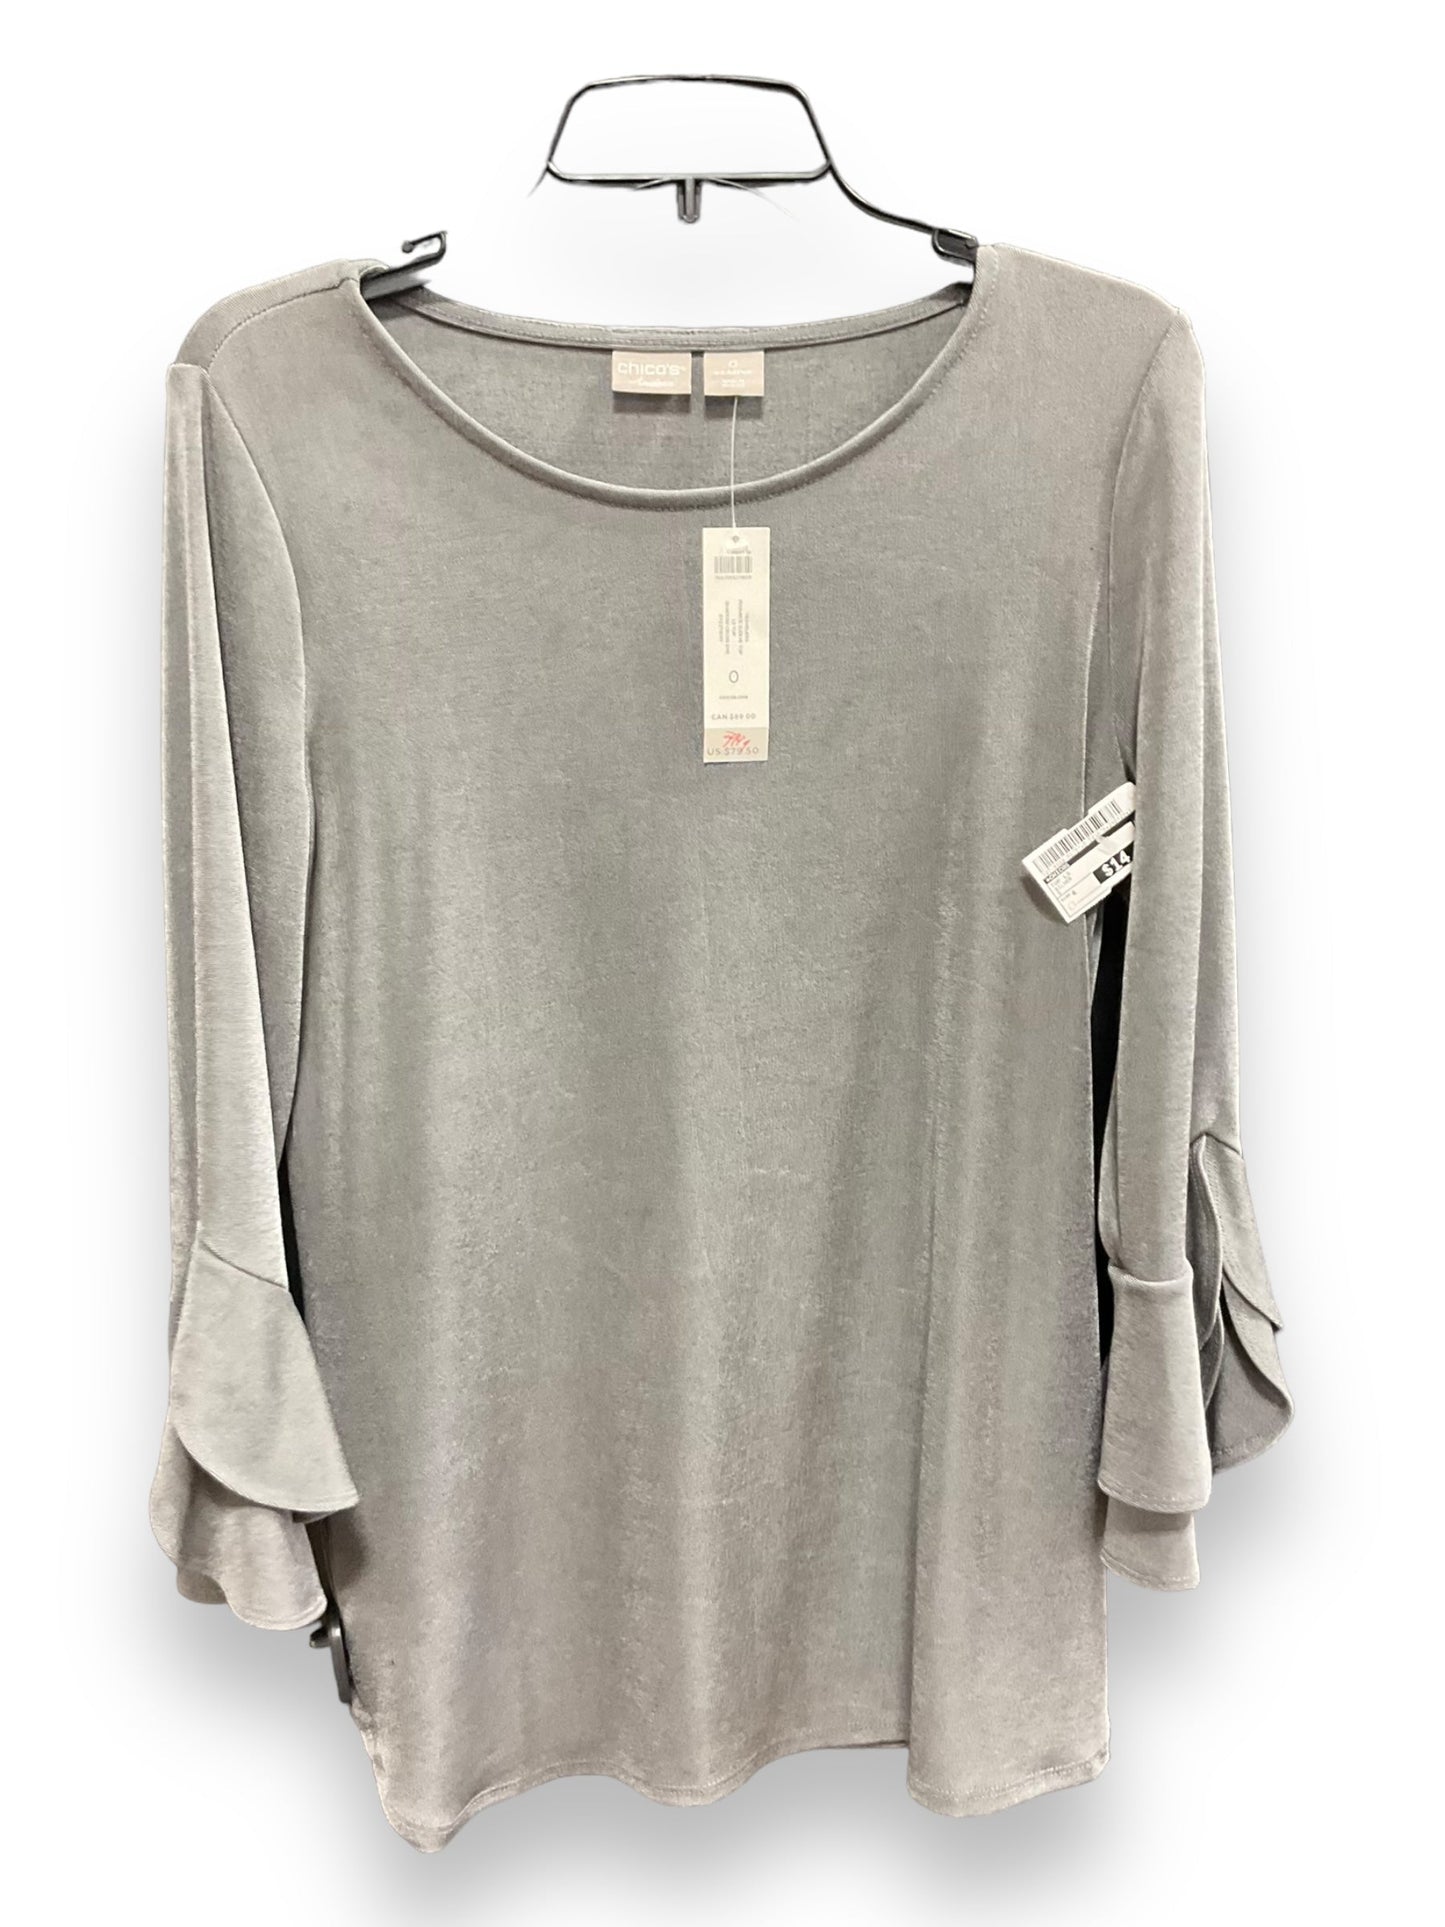 Silver Top Long Sleeve Chicos, Size 4